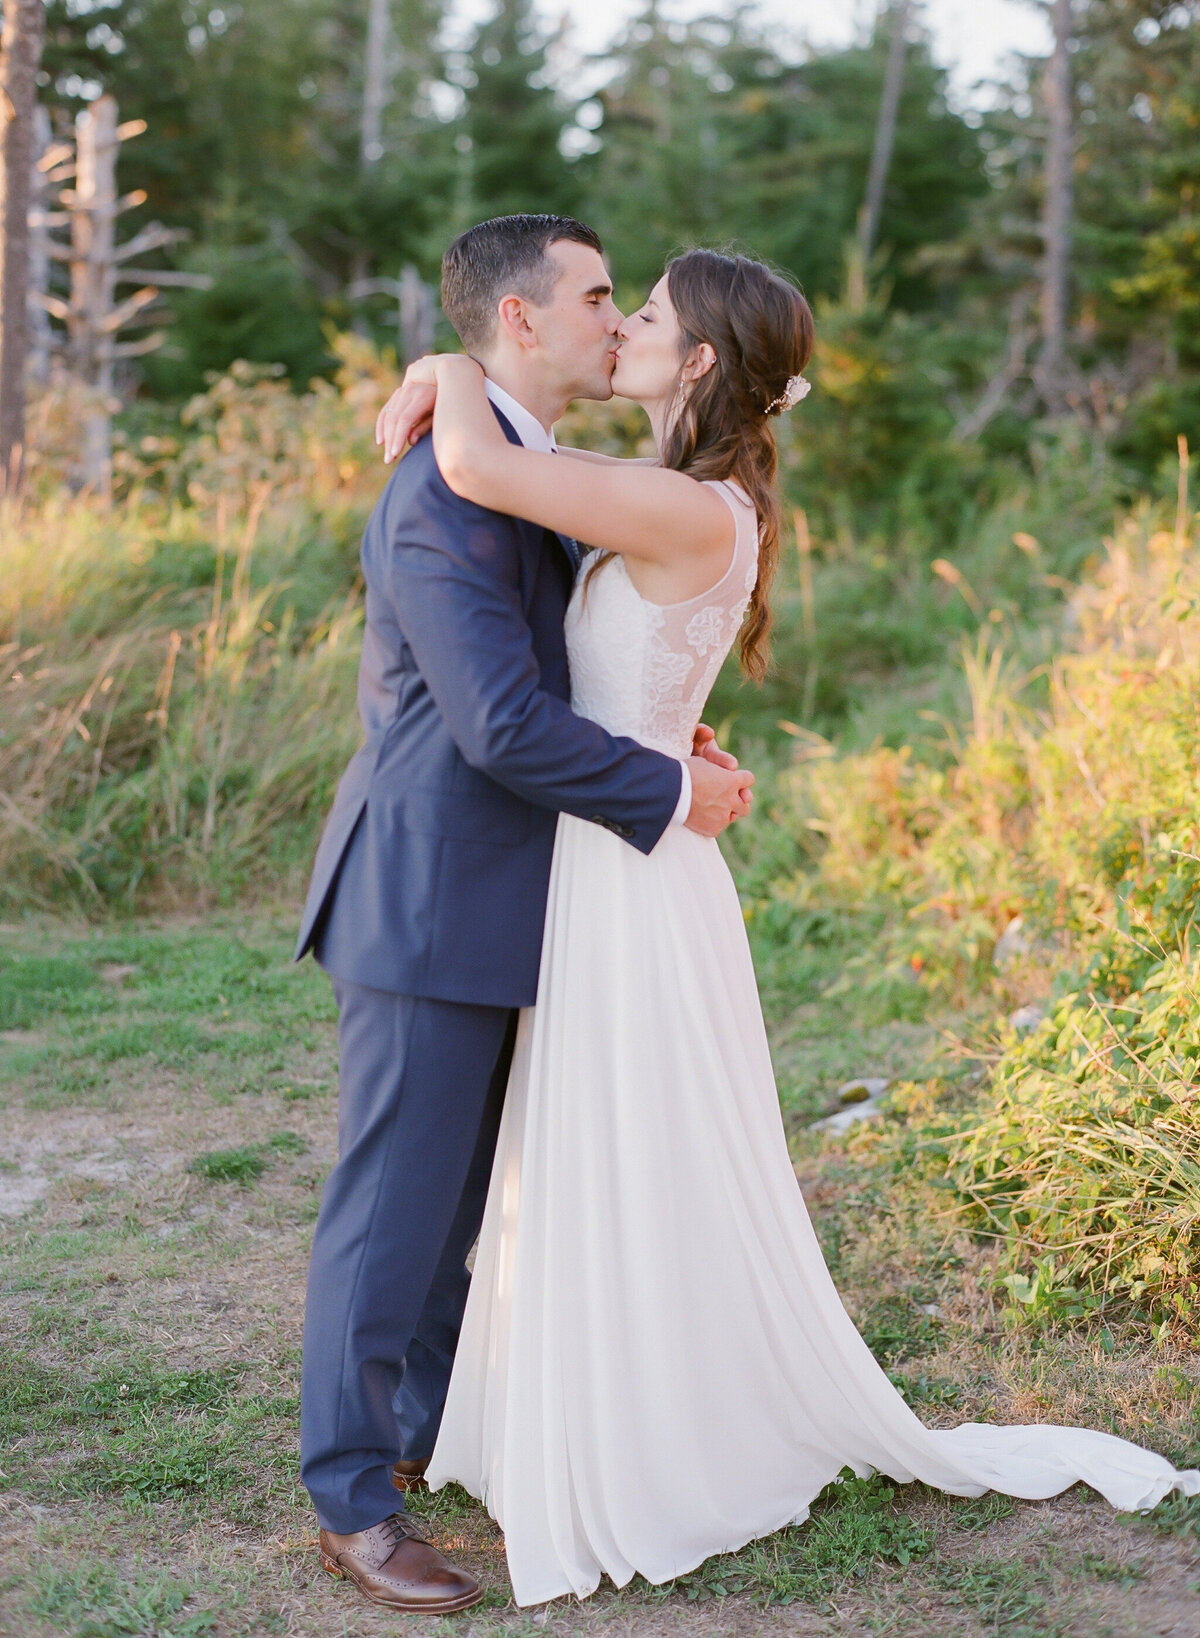 Jacqueline Anne Photography - Halifax Wedding Photographer - Jaclyn and Morgan-78